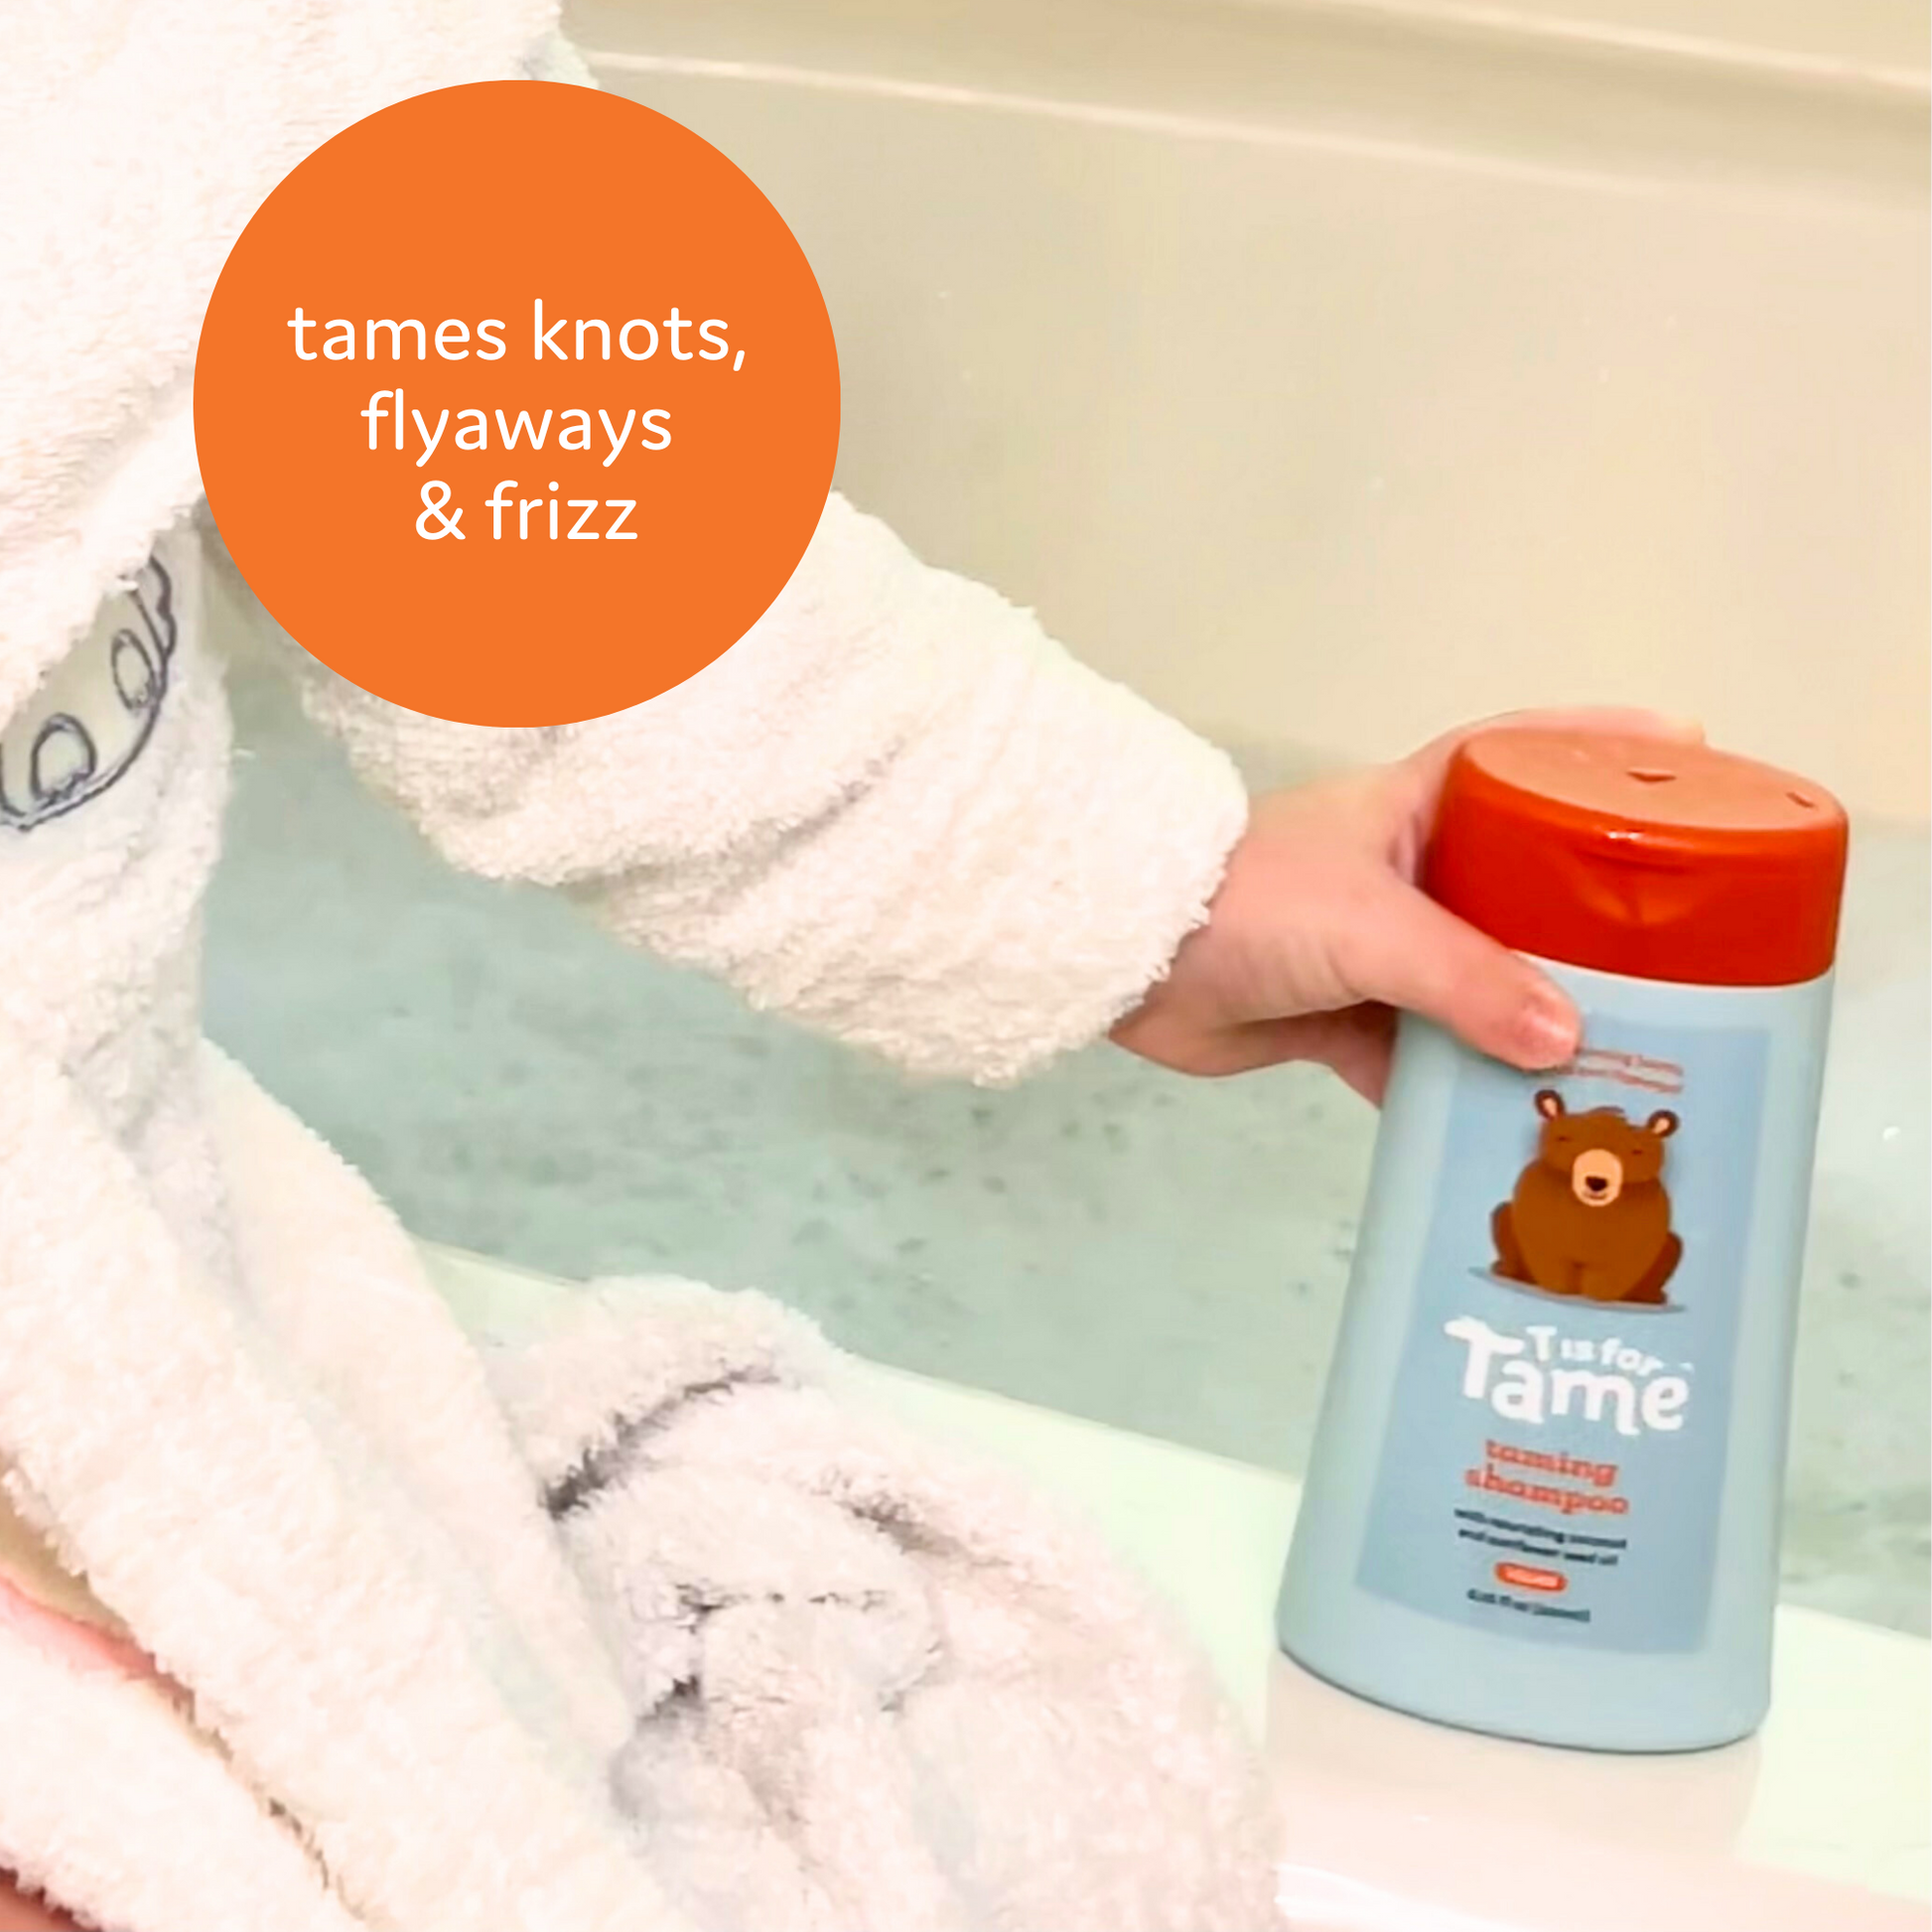 The Taming Shampoo bottle in front of a bath with the tagline: “Tames knots, flyaways, and frizz”